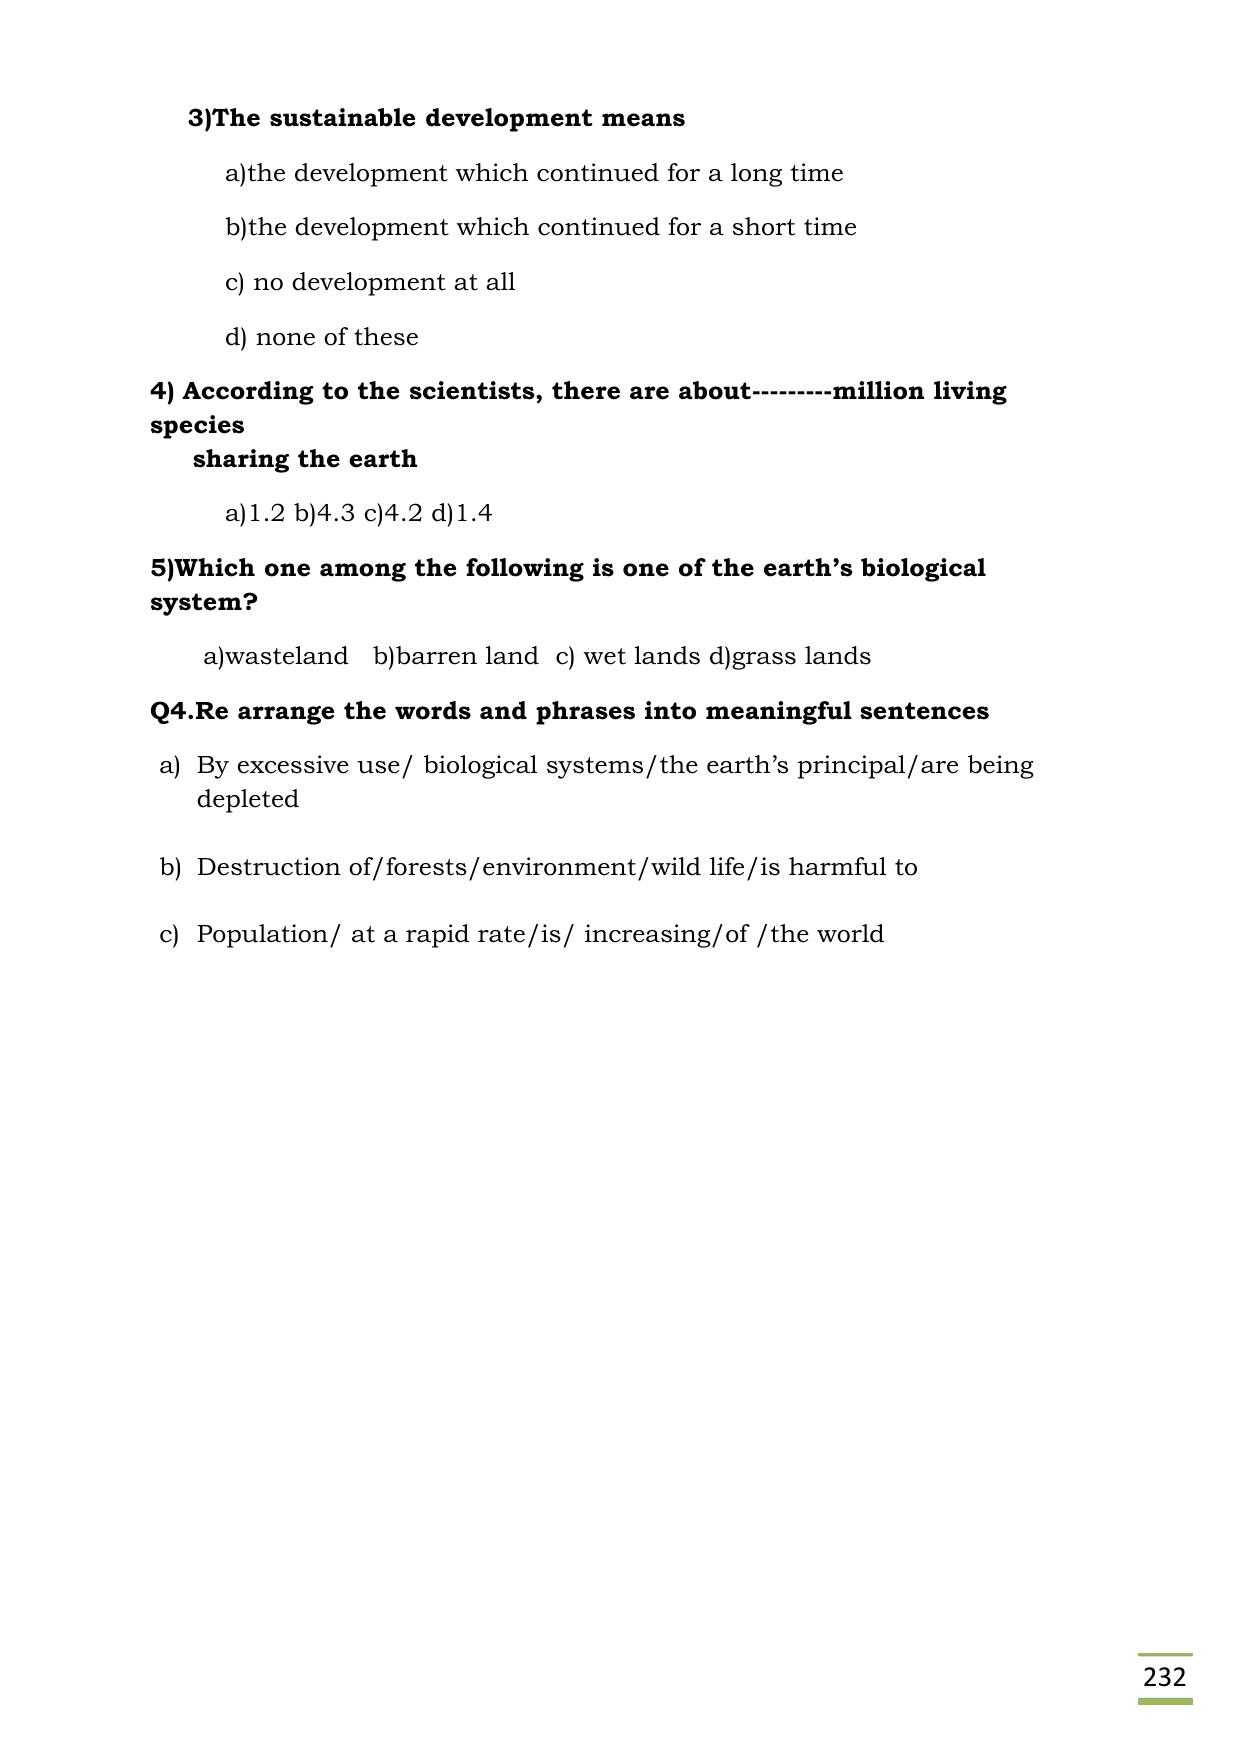 CBSE Worksheets for Class 11 English The Ailing Planet questions answers - Page 2